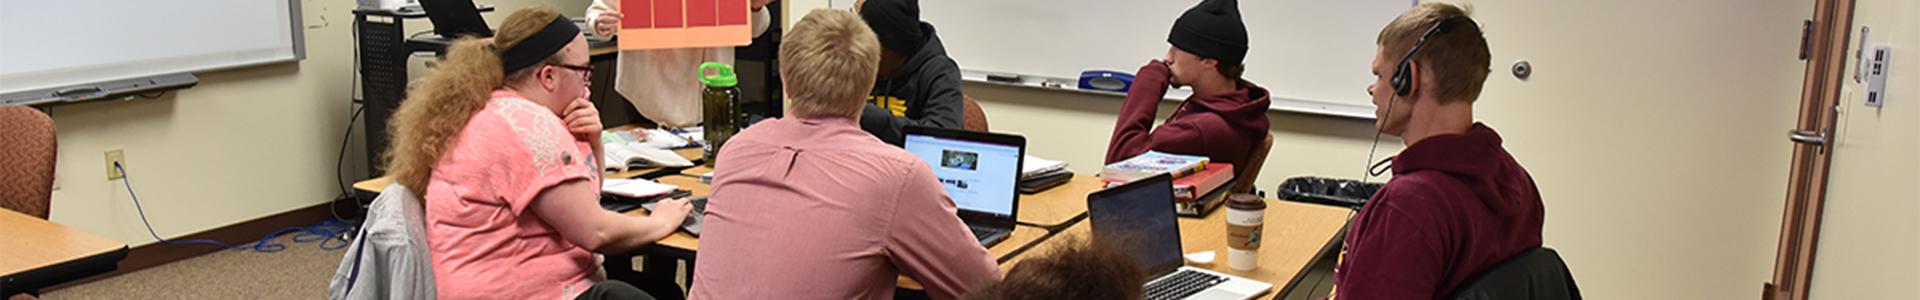 Student with assistive technology in the classroom at UMN Crookston